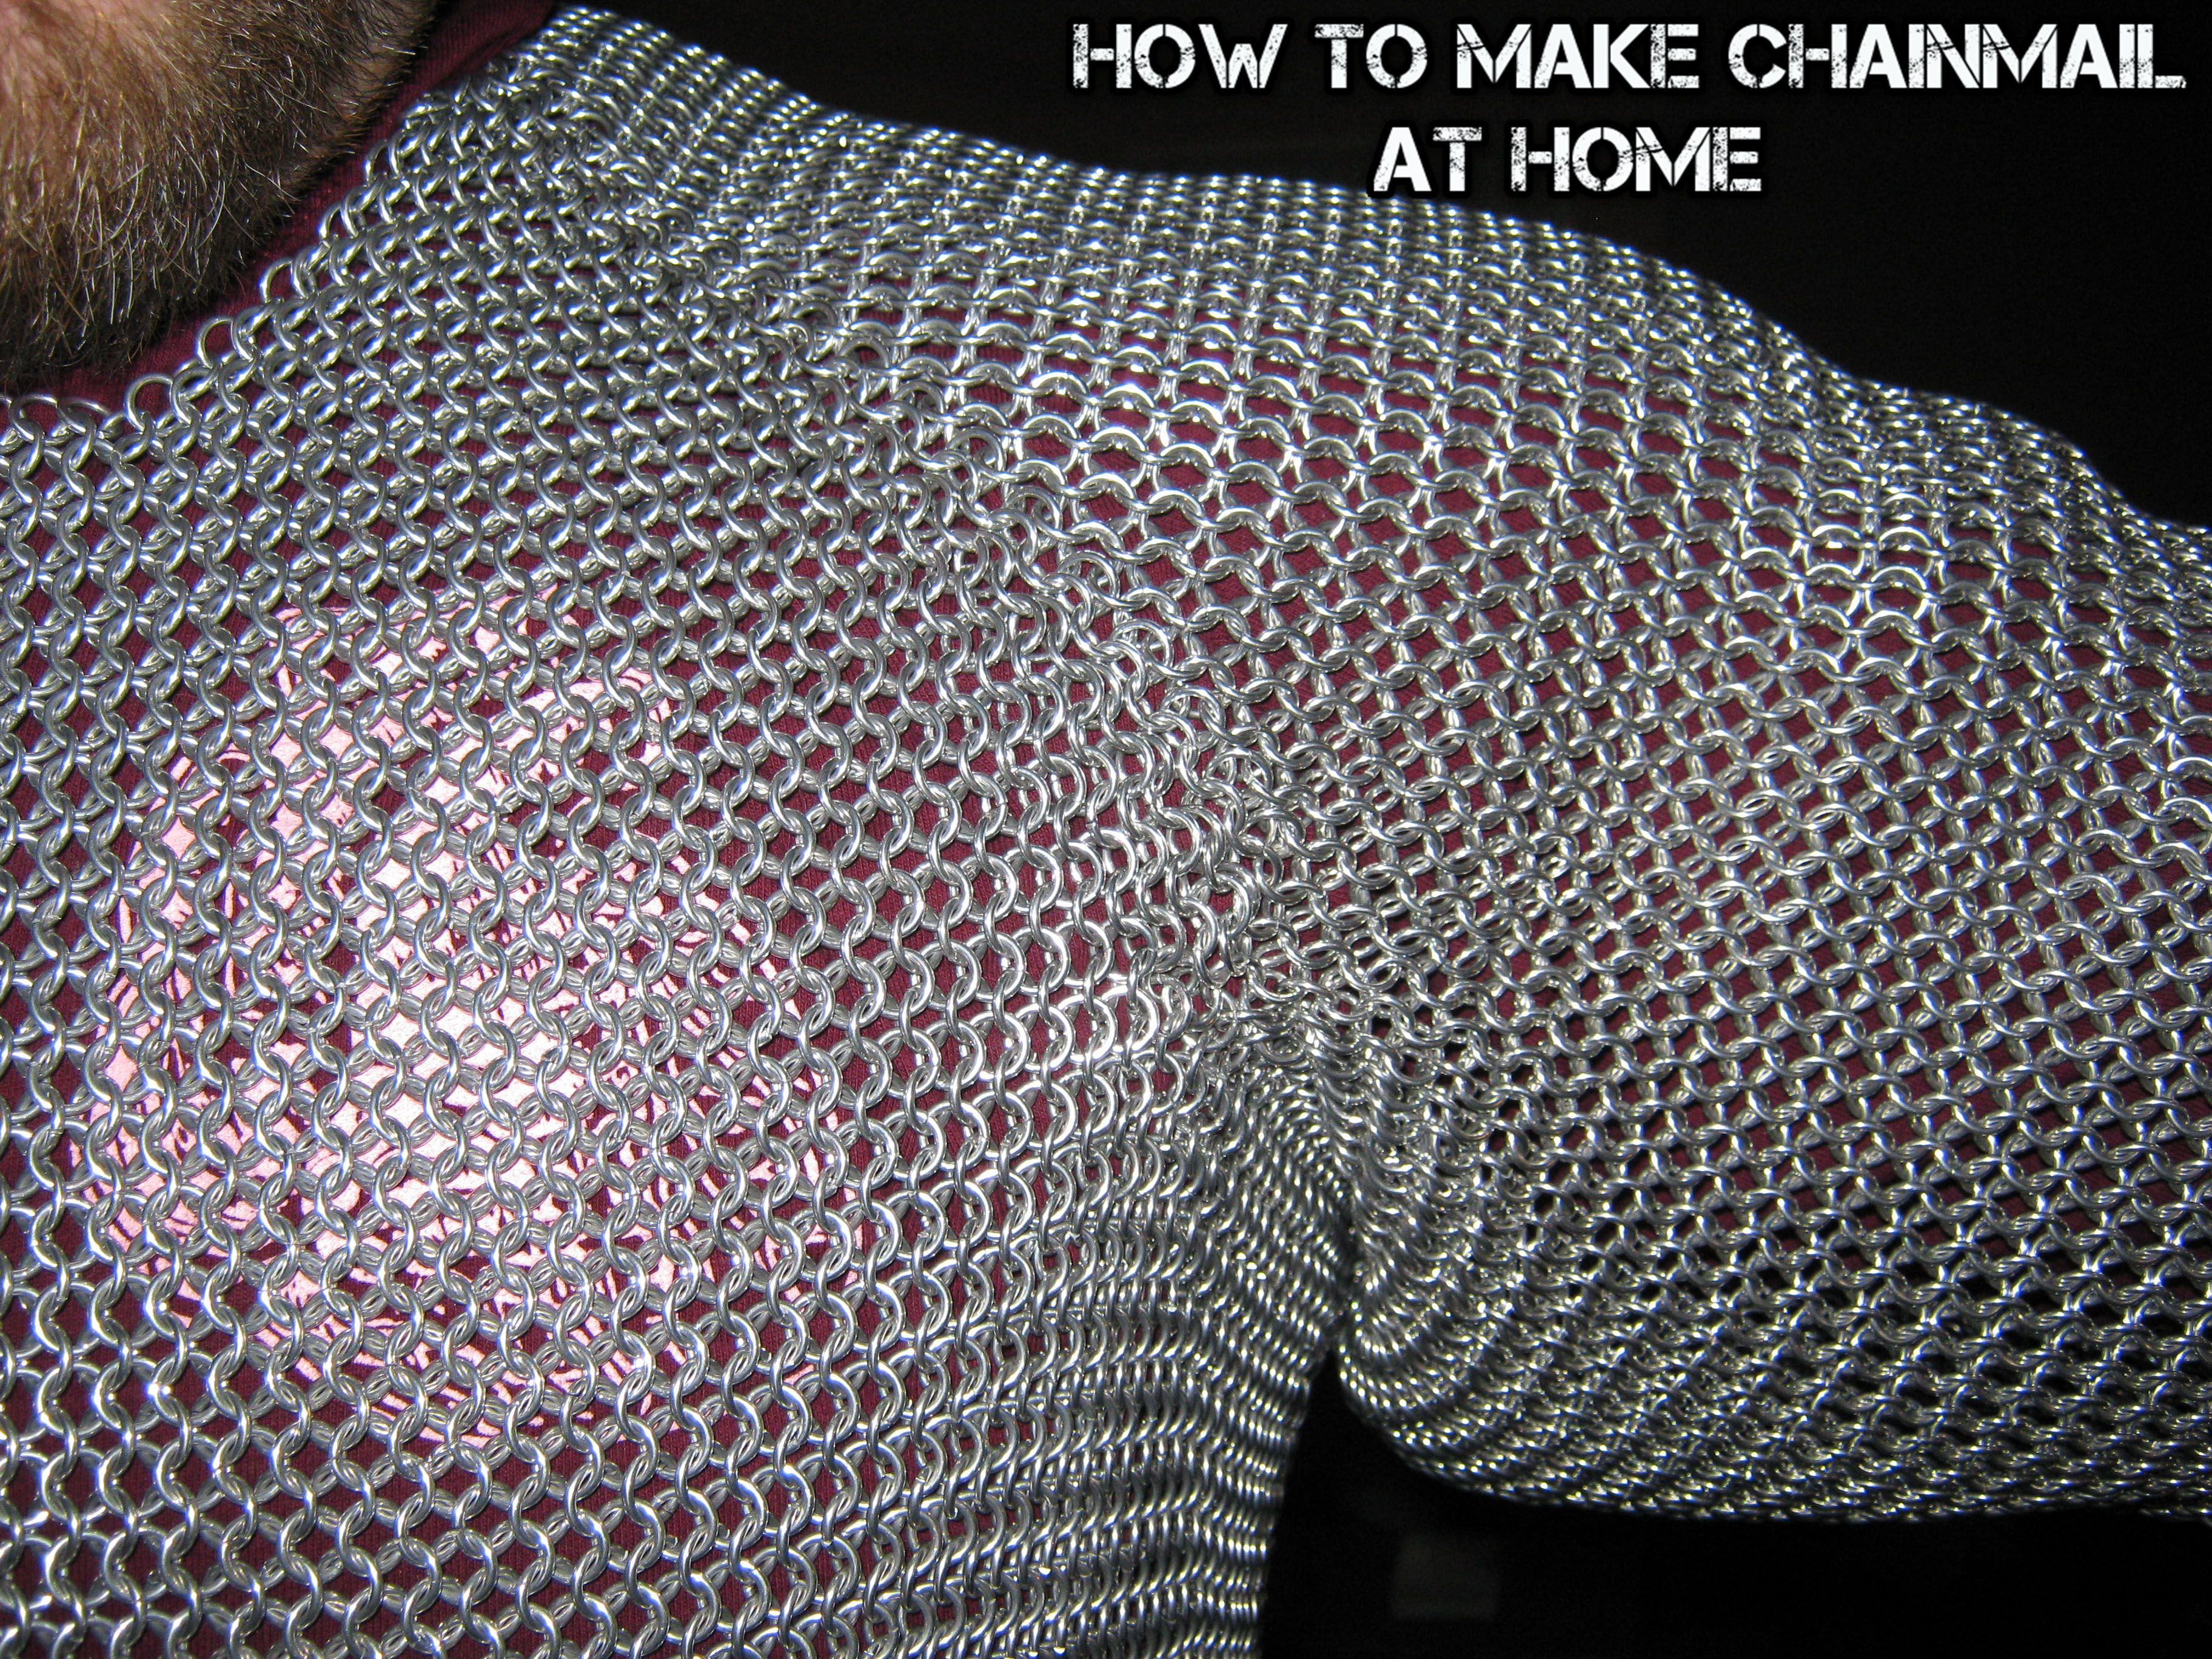 Chainmail Crochet Pattern How To Make Chainmail At Home Survival And Homesteading Chain